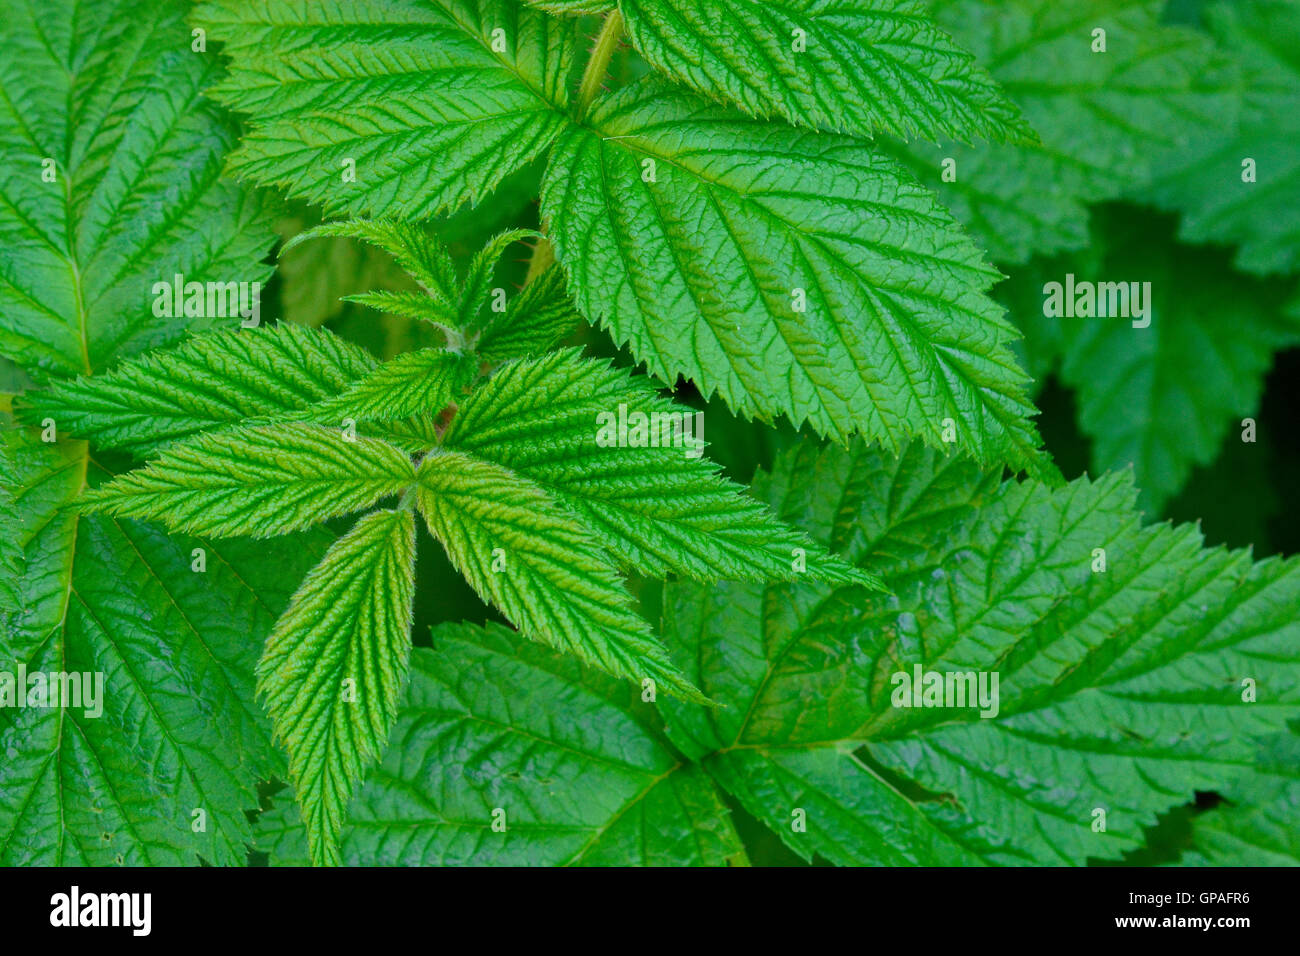 Bright textured green leaves of the blackberry bush. Textured green leaves background. Stock Photo